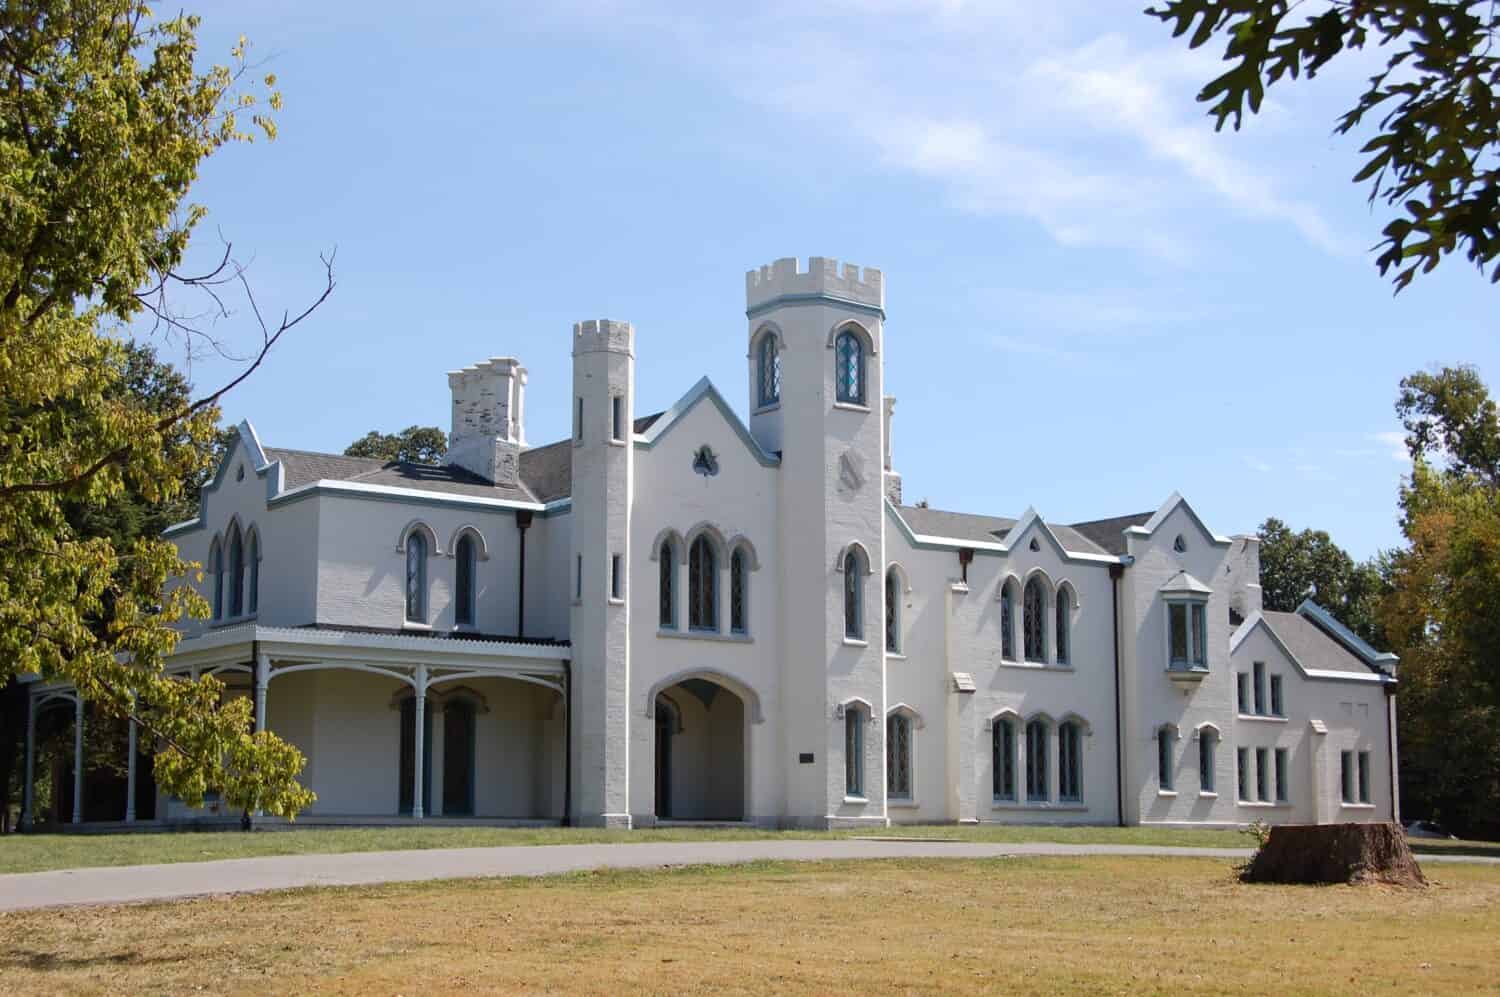 Loudoun House is considered one of the largest and finest examples of Gothic Revival architecture in Kentucky. 